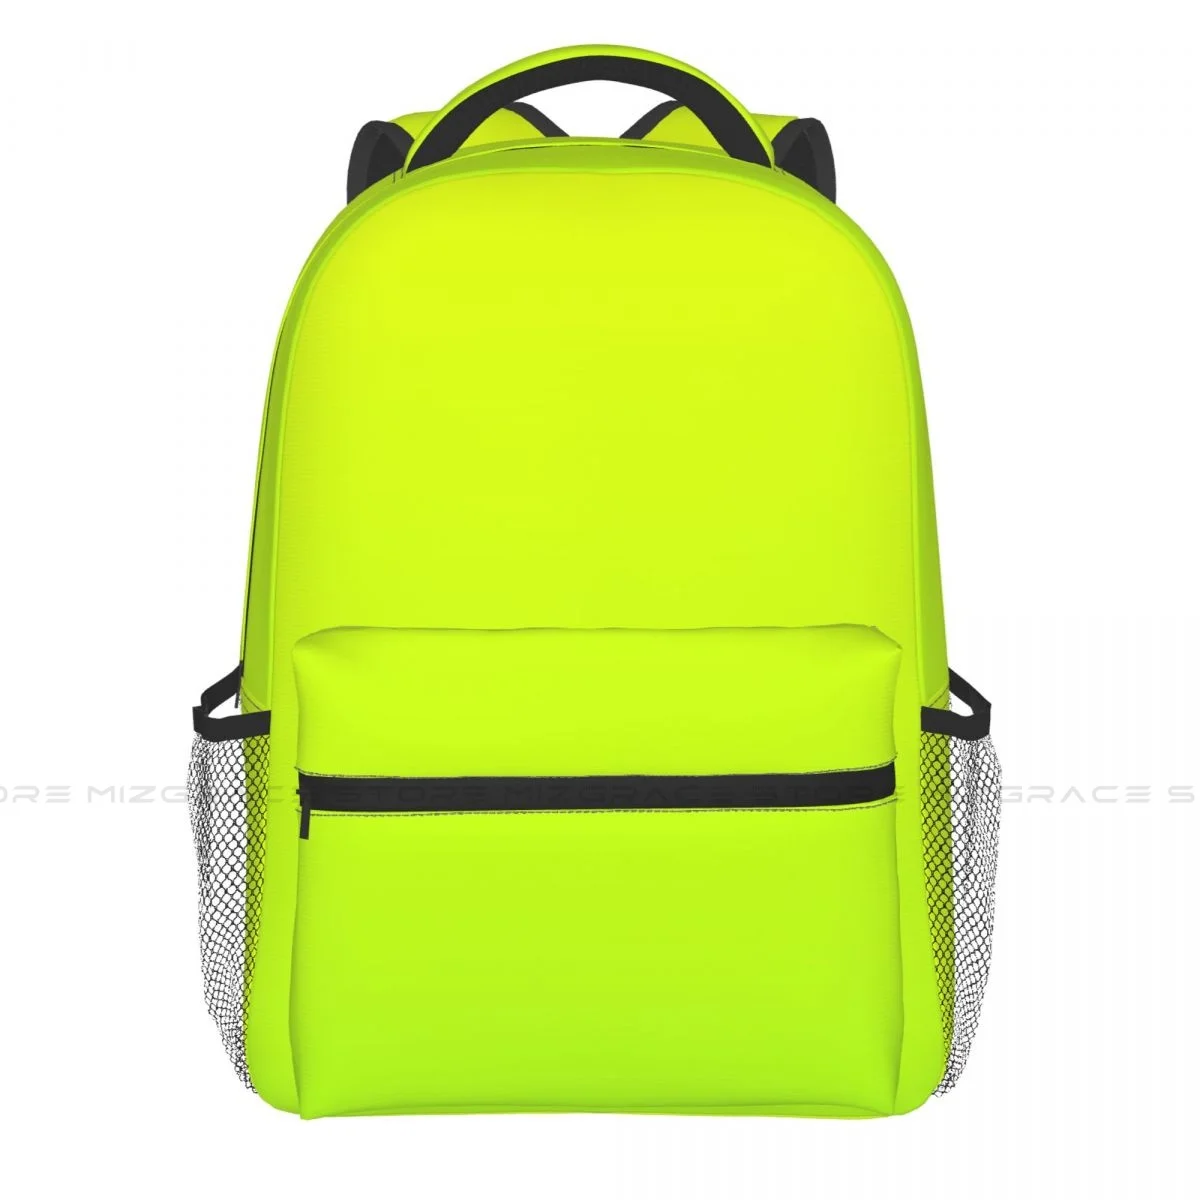 

Large Capacity Casual School Bag Yellow Lime Green Ombre Travel Laptop Backpacks Solid Colour Art Rucksack for Teenager